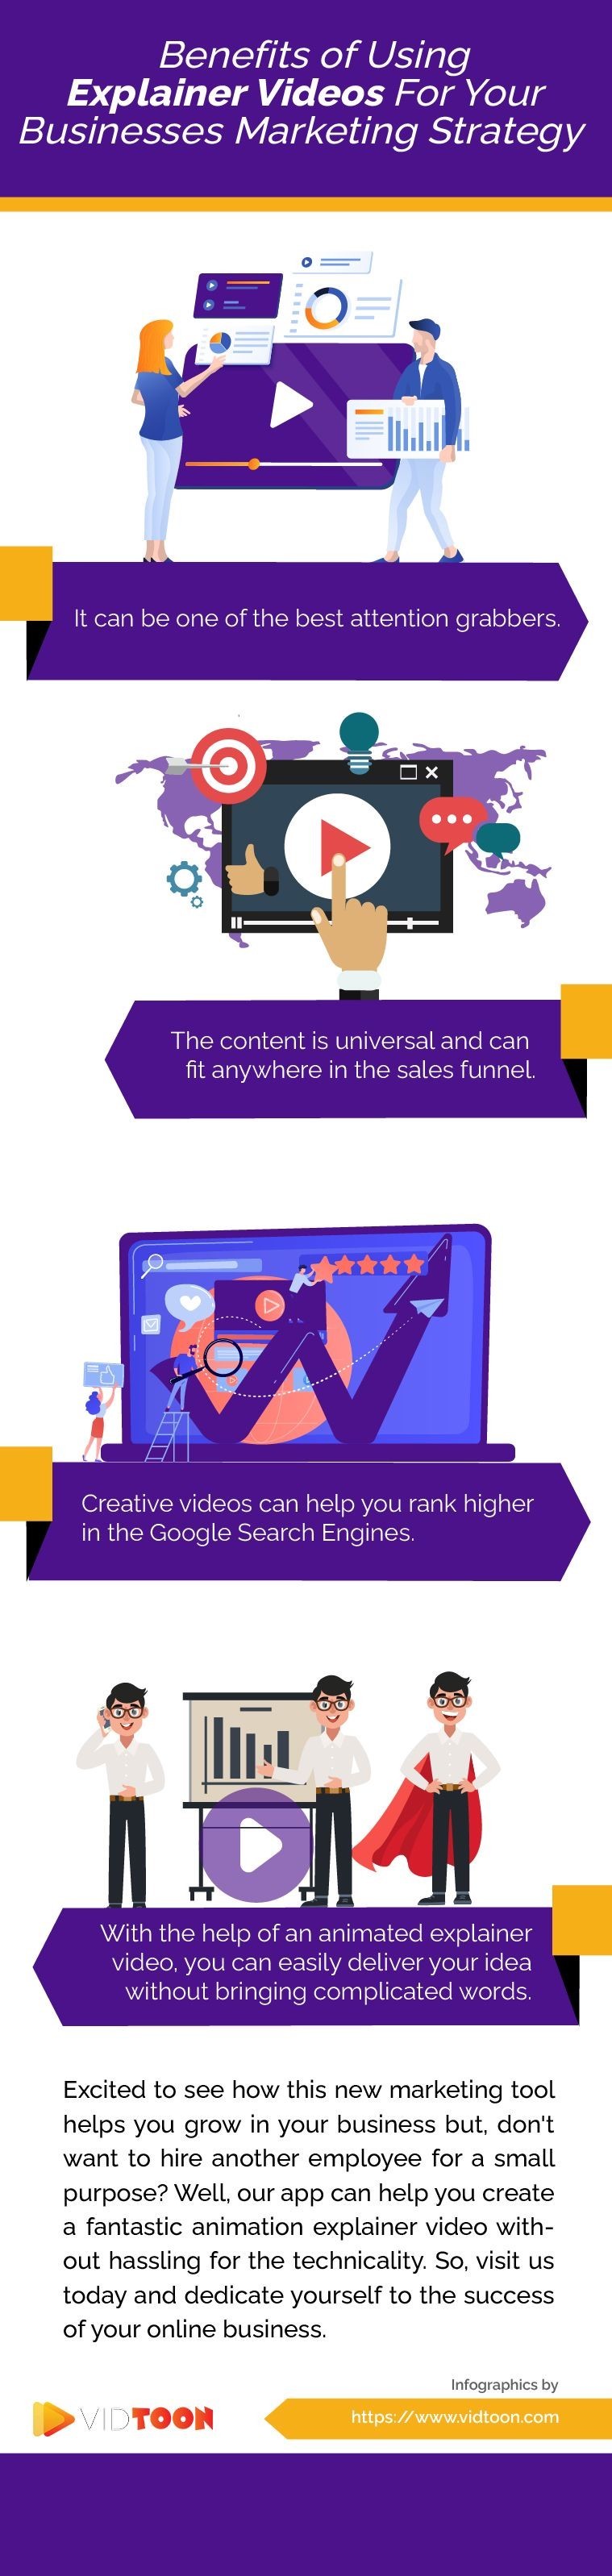 Benefits of Using Explainer Videos For Your Businesses Marketing Strategy